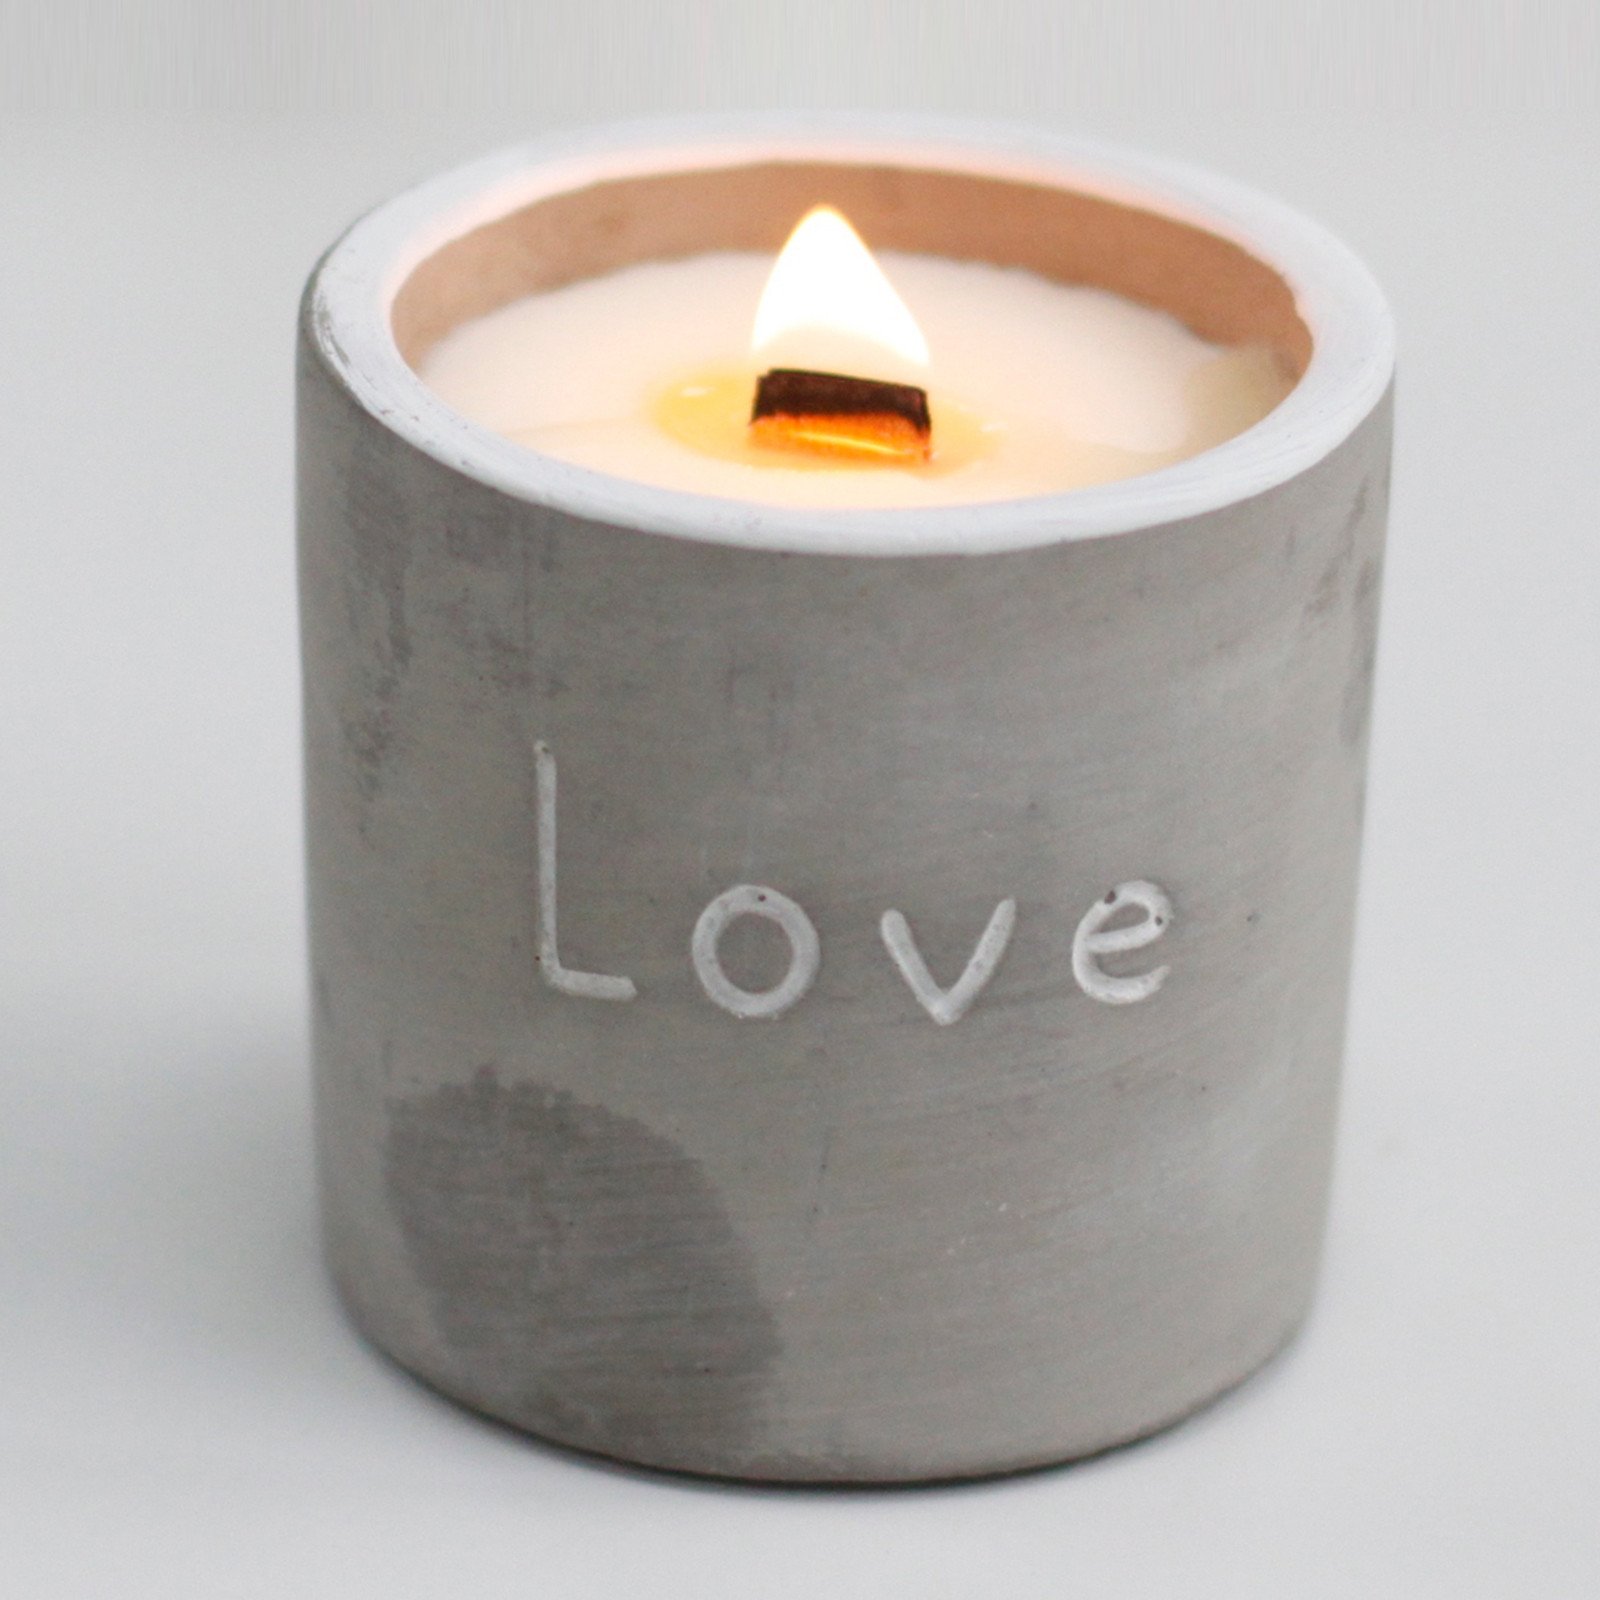 Concrete Wooden Wick Candle. Love - Purple Fig & Casis